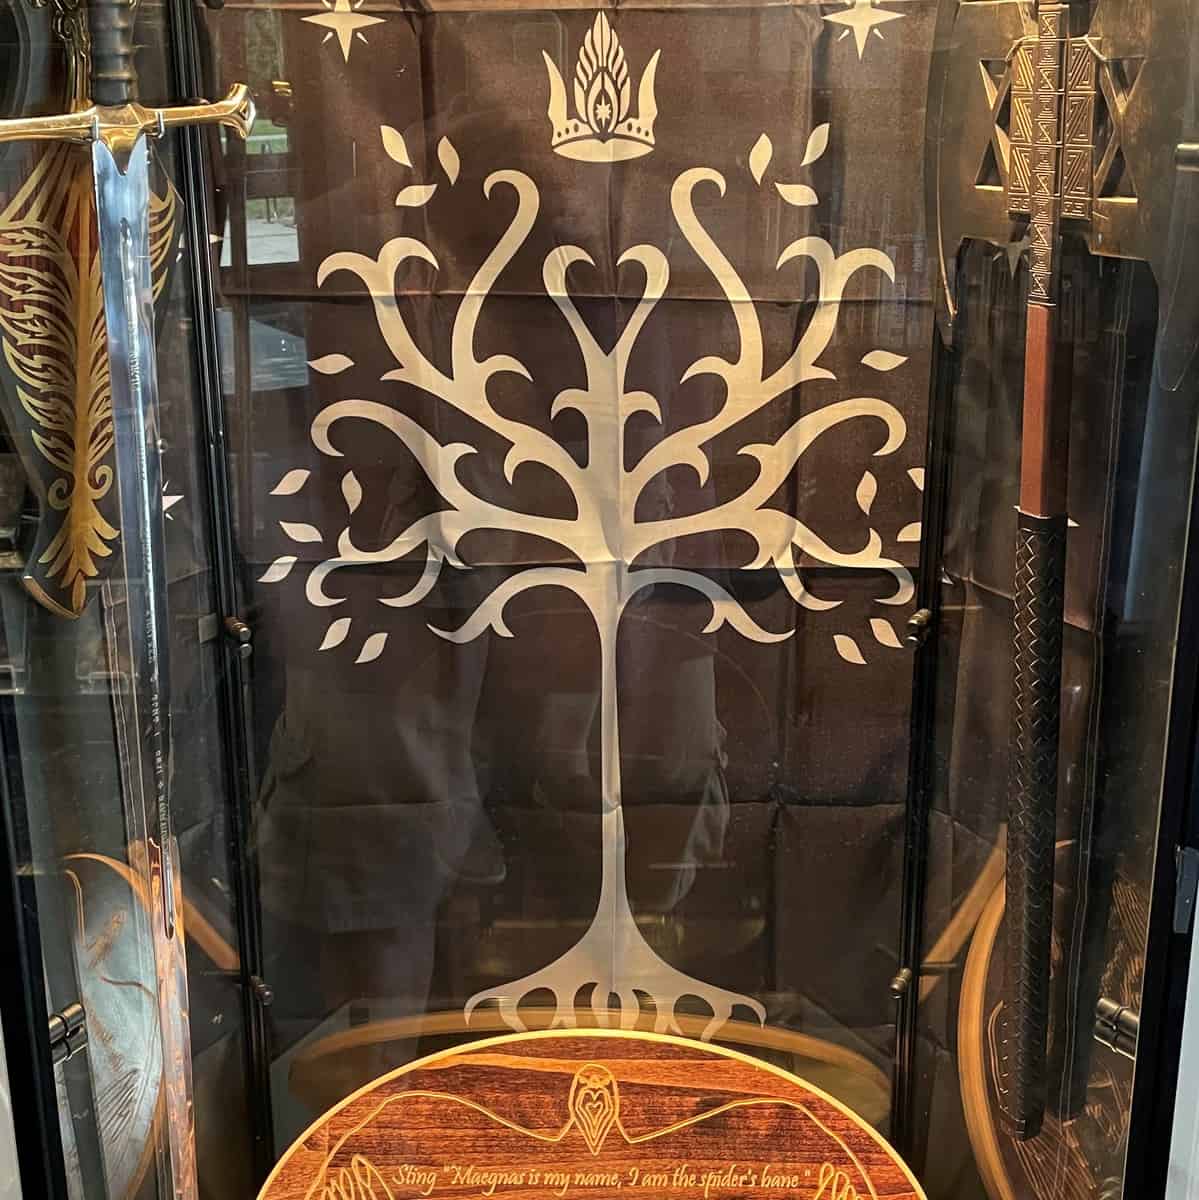 Image of Lord of the Rings swords, banner, and plaque